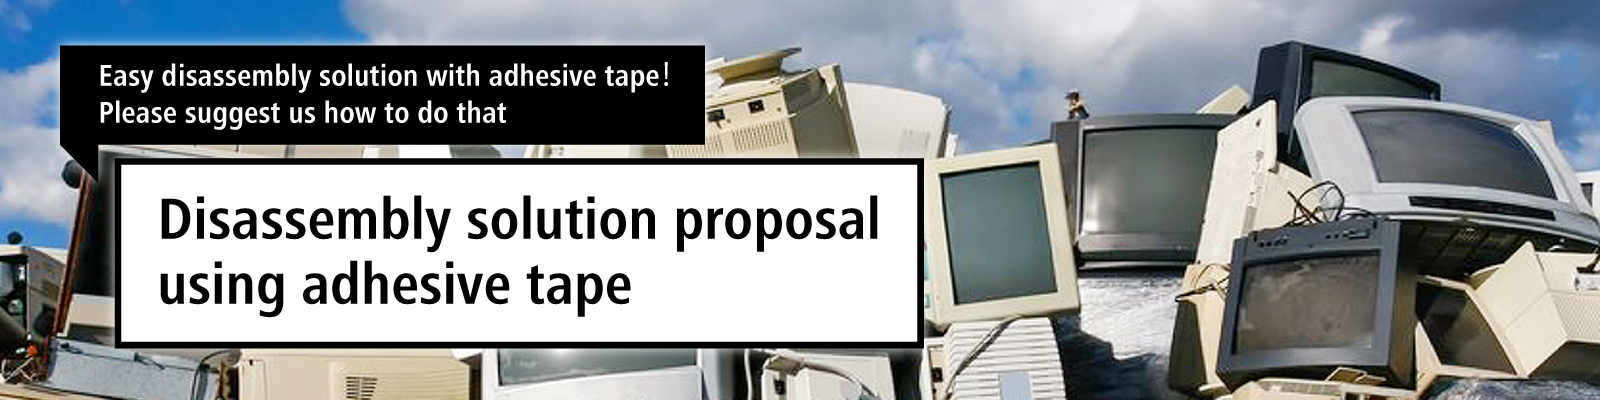 Disassembly solution proposal using adhesive tape